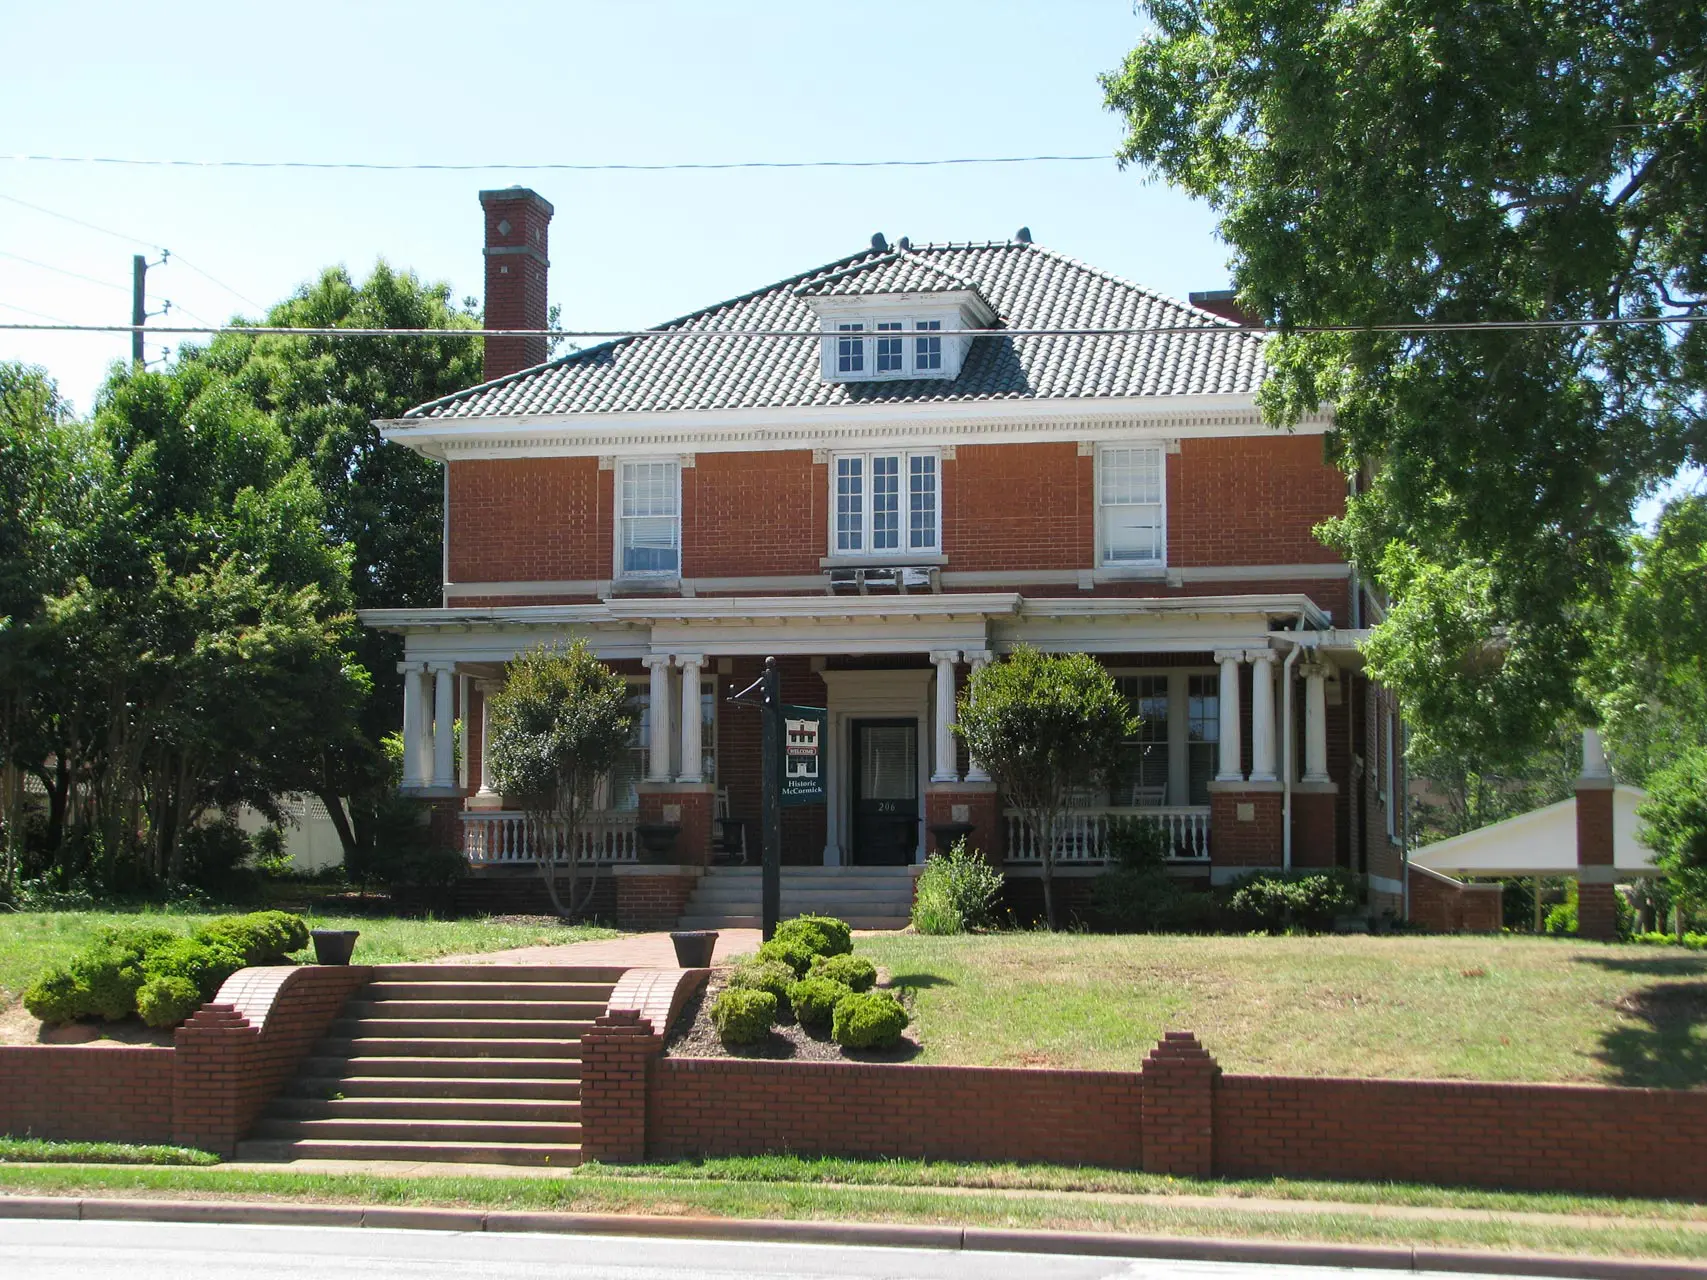 Town-of-McCormick-Dorn-House